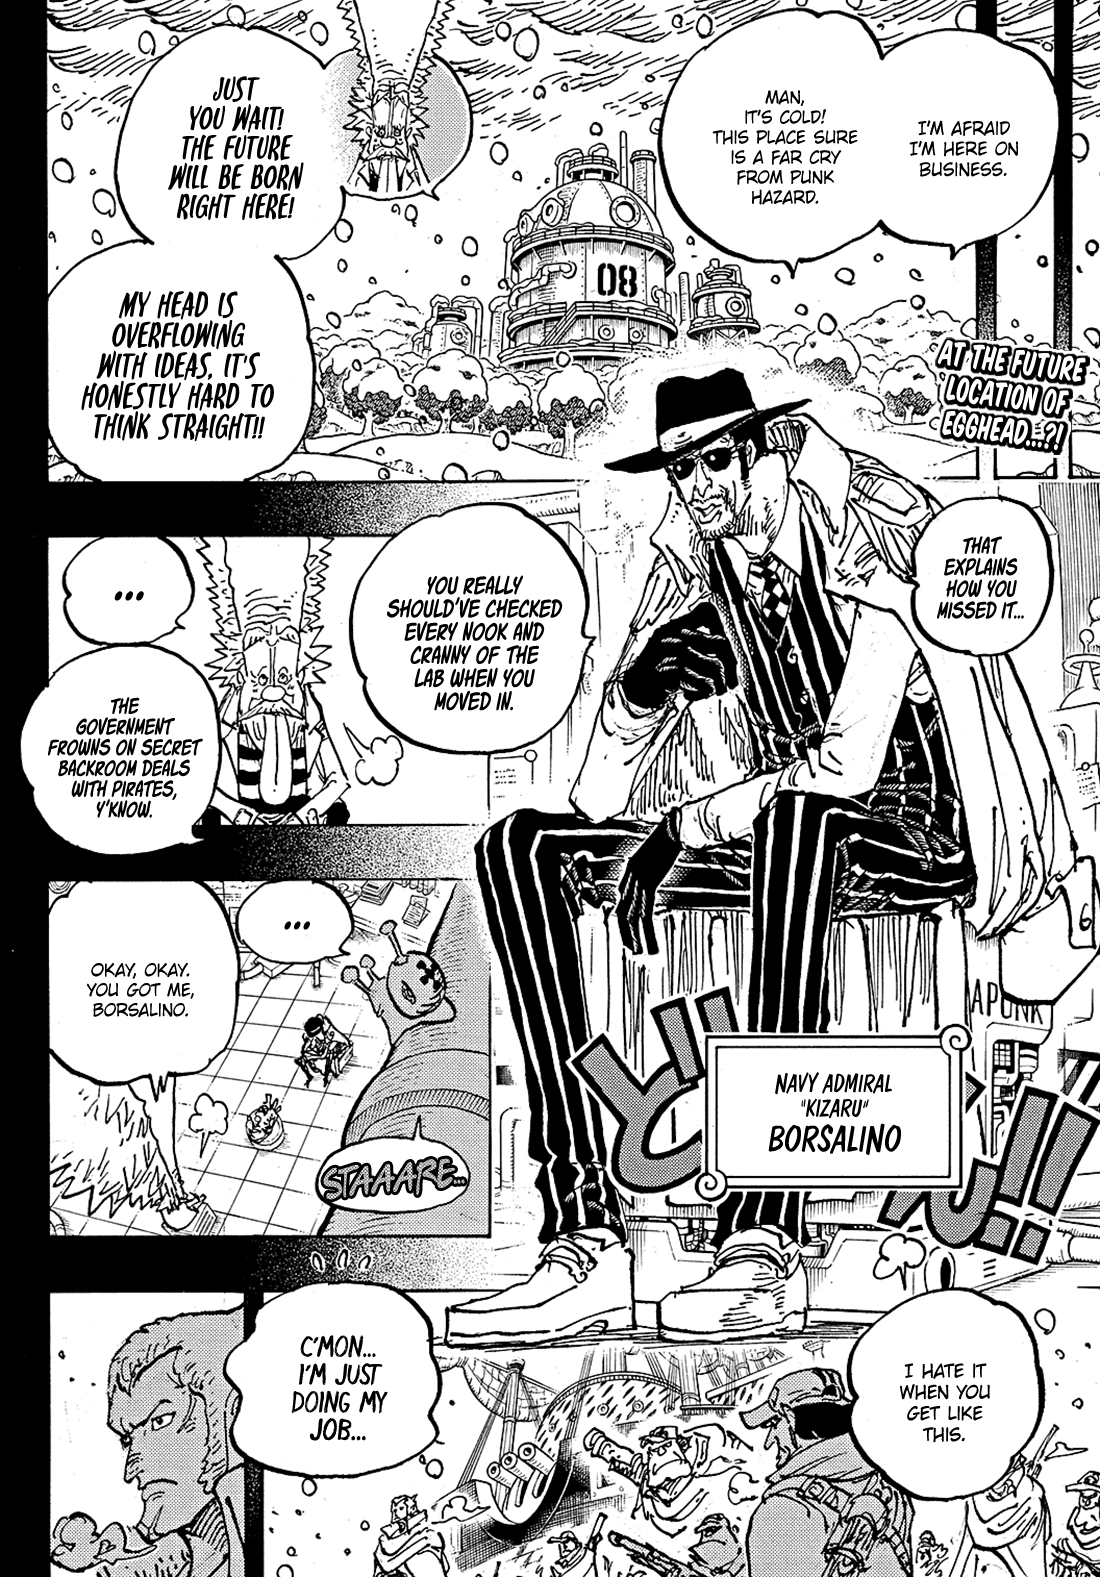 One Piece, Chapter 1100  TcbScans Org - Free Manga Online in High Quality